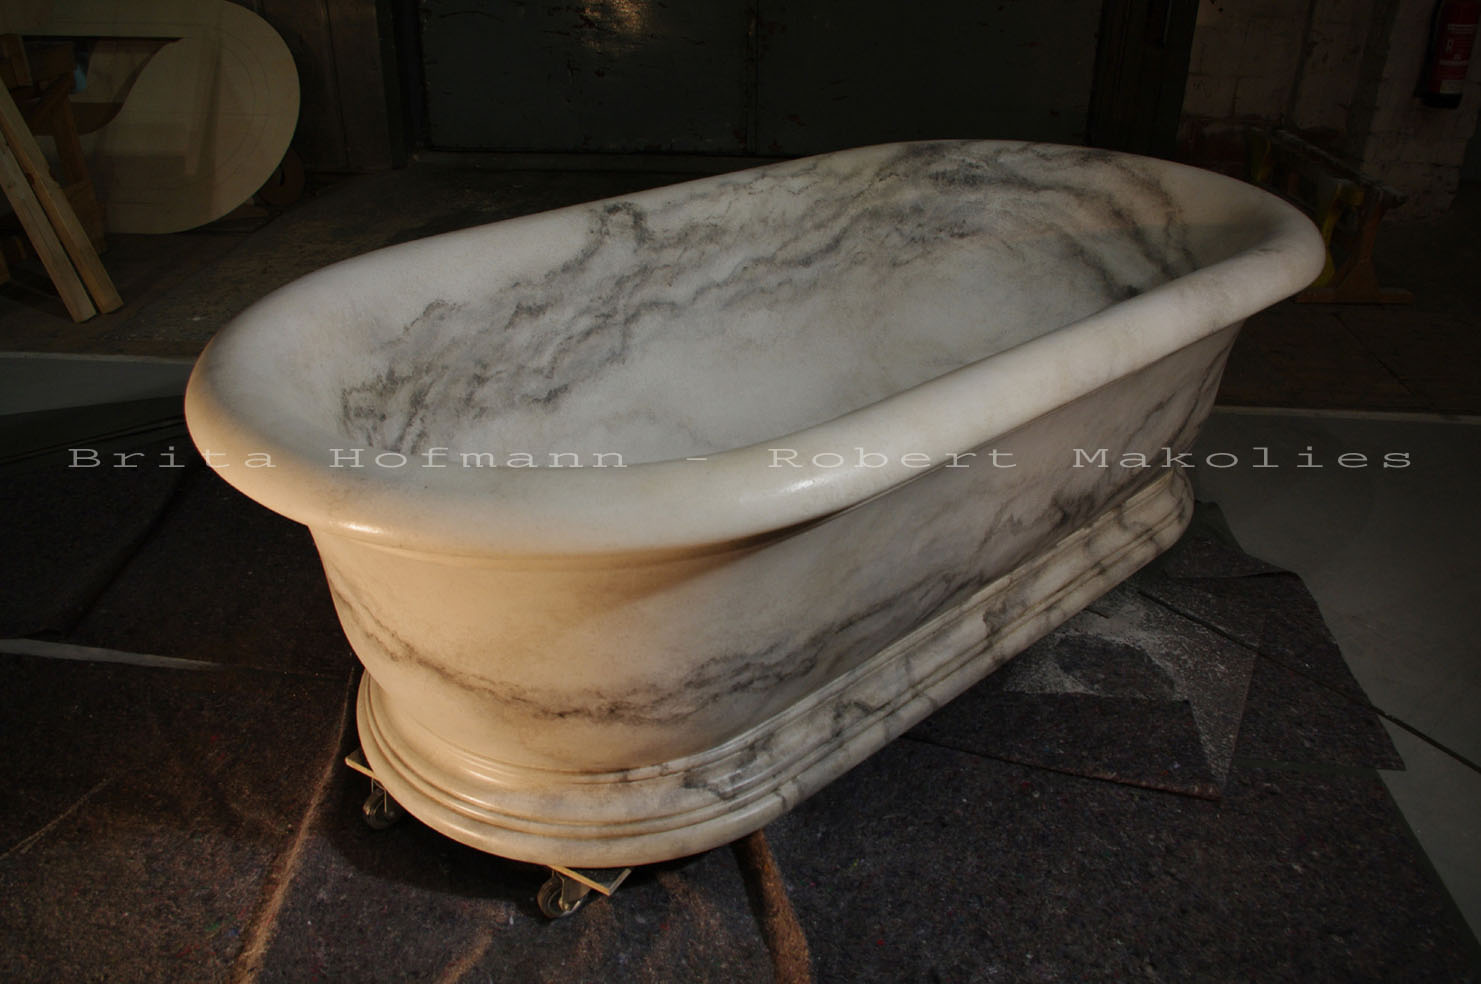 The Three Musketeers - marble bath tub - complete construktion ( polystyrene, MDF,plaster,paint )